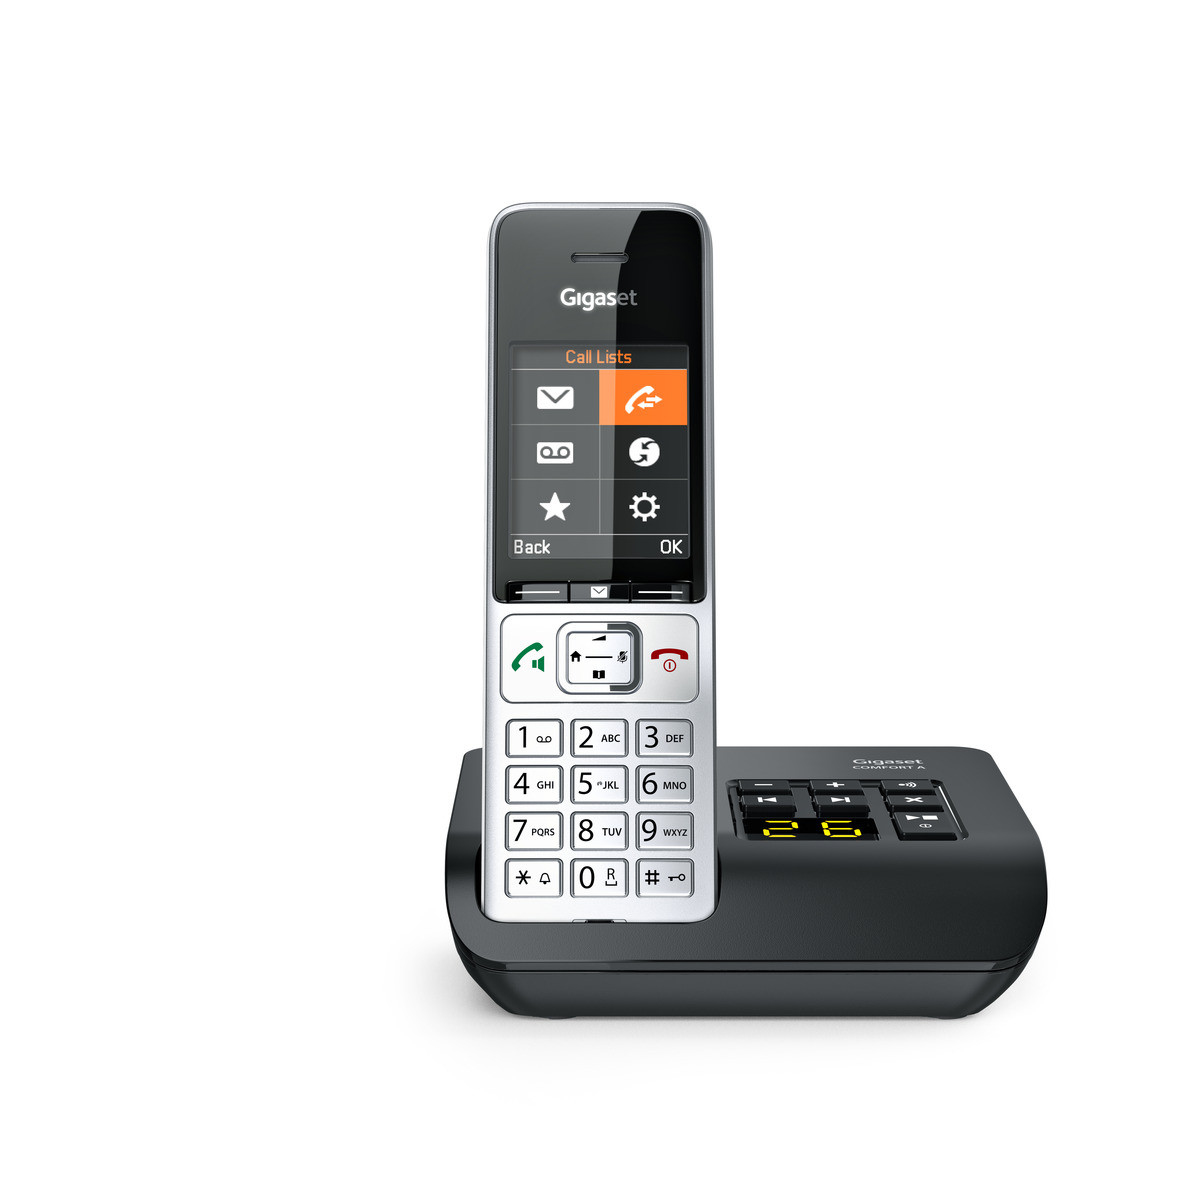 S30852-H3023-B101 UNIFY GIGASET OPENSTAGE COMFORT 500A - Analog/DECT telephone - Wired handset - Speakerphone - 200 entries - Caller ID - Black - Silver